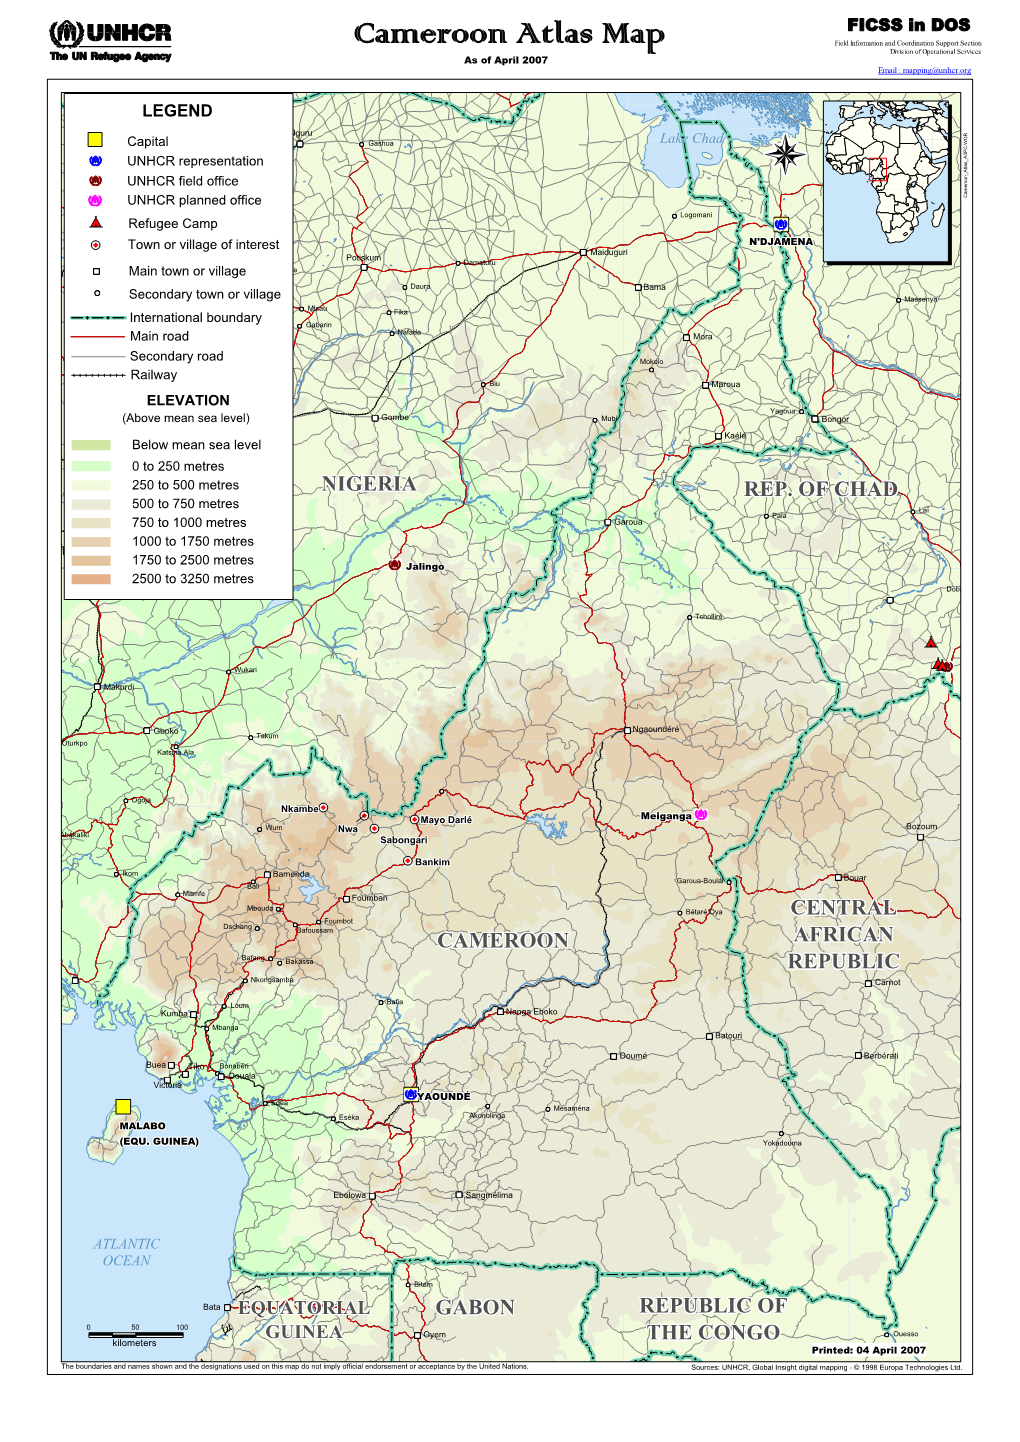 Cameroon Atlas Map Field Information and Coordination Support Section Division of Operational Services As of April 2007 Email : Mapping@Unhcr.Org